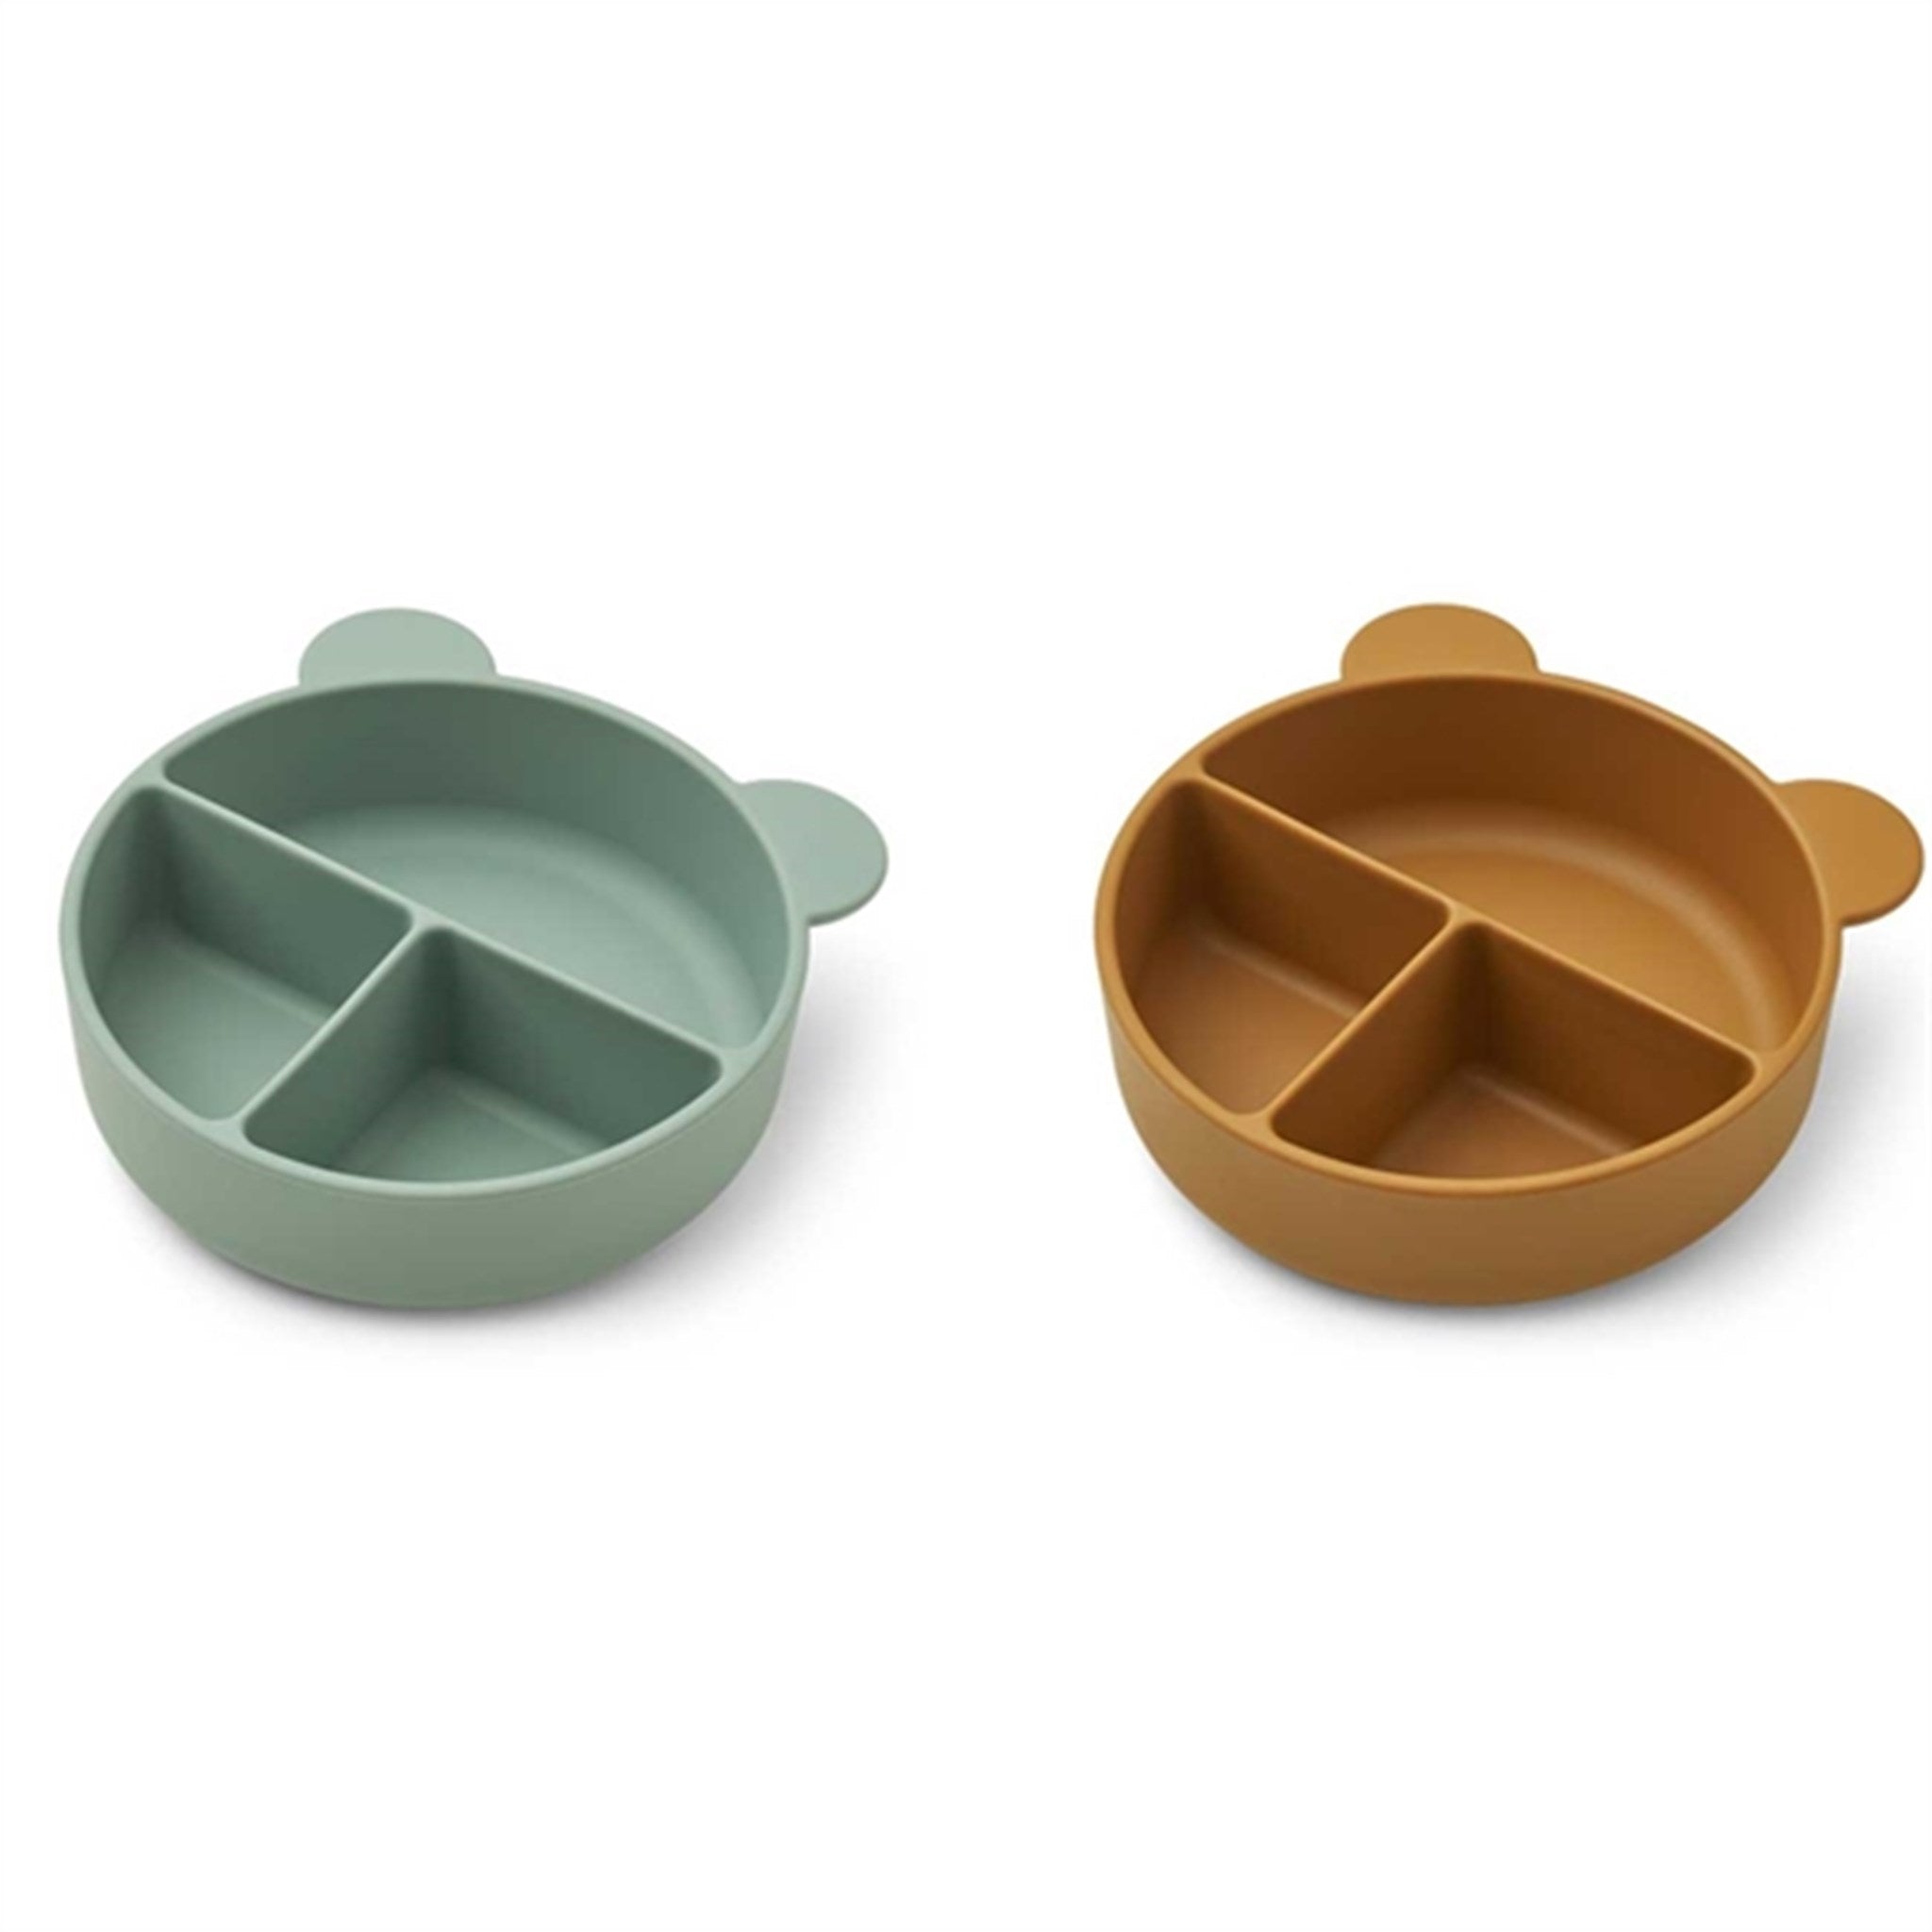 Liewood Conny Silicone Divider Bowl 2-pack Peppermint Golden Caramel Mix